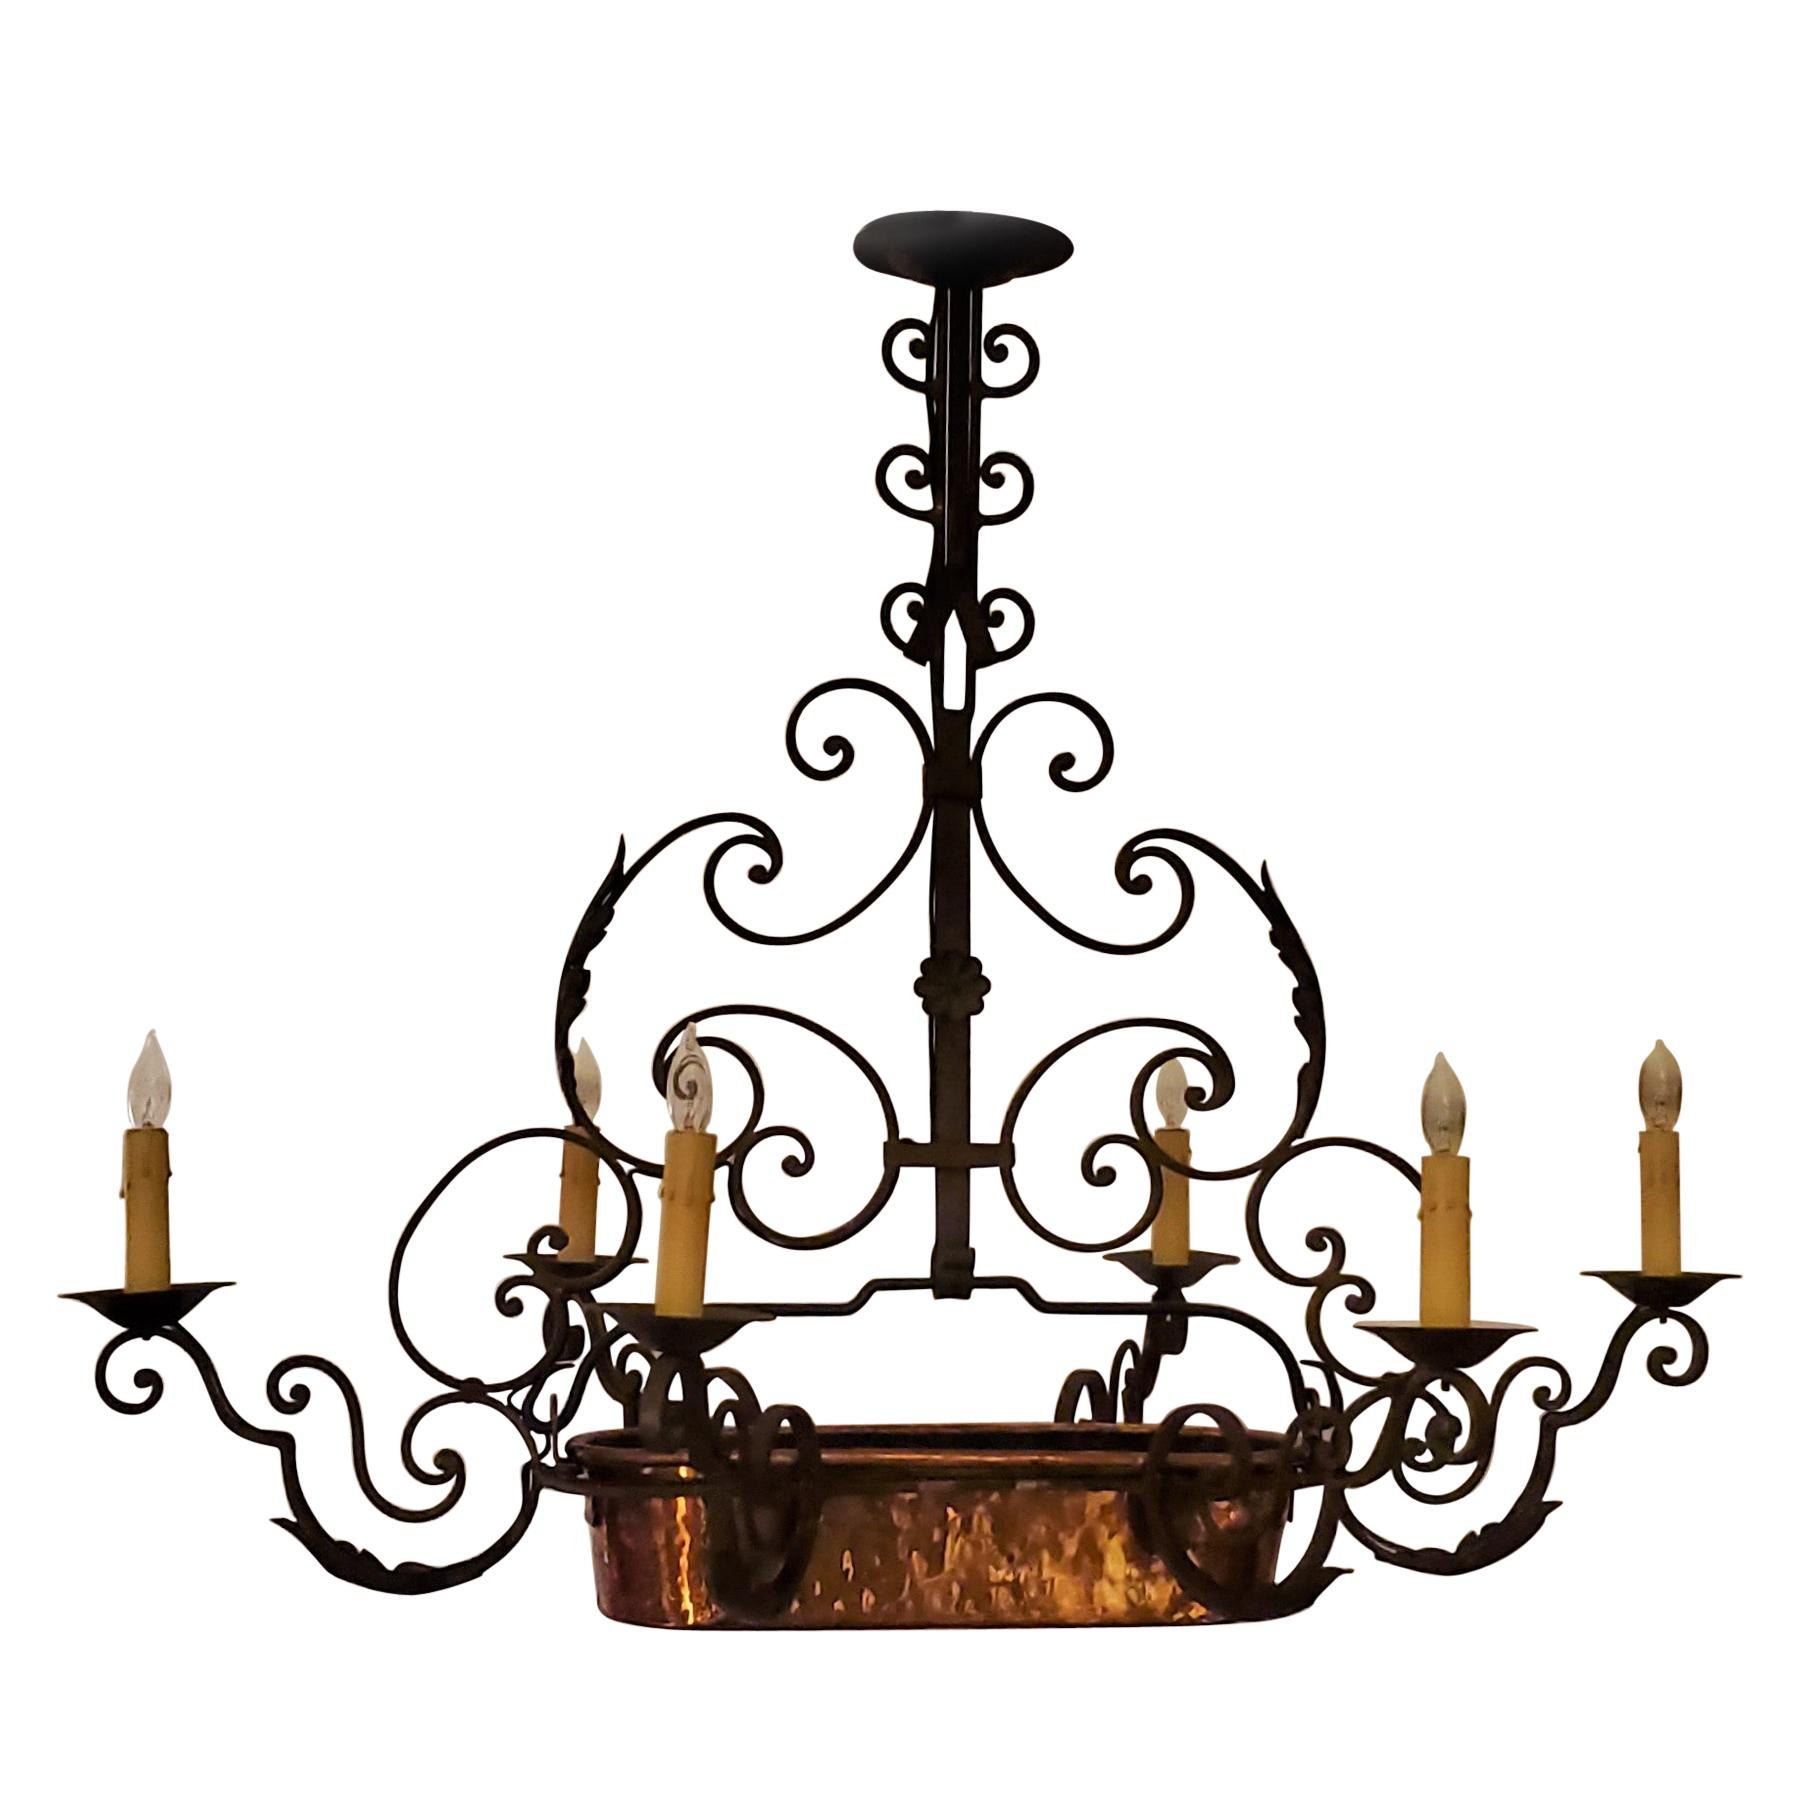 Antique French Iron and Copper Chandelier, circa 1910